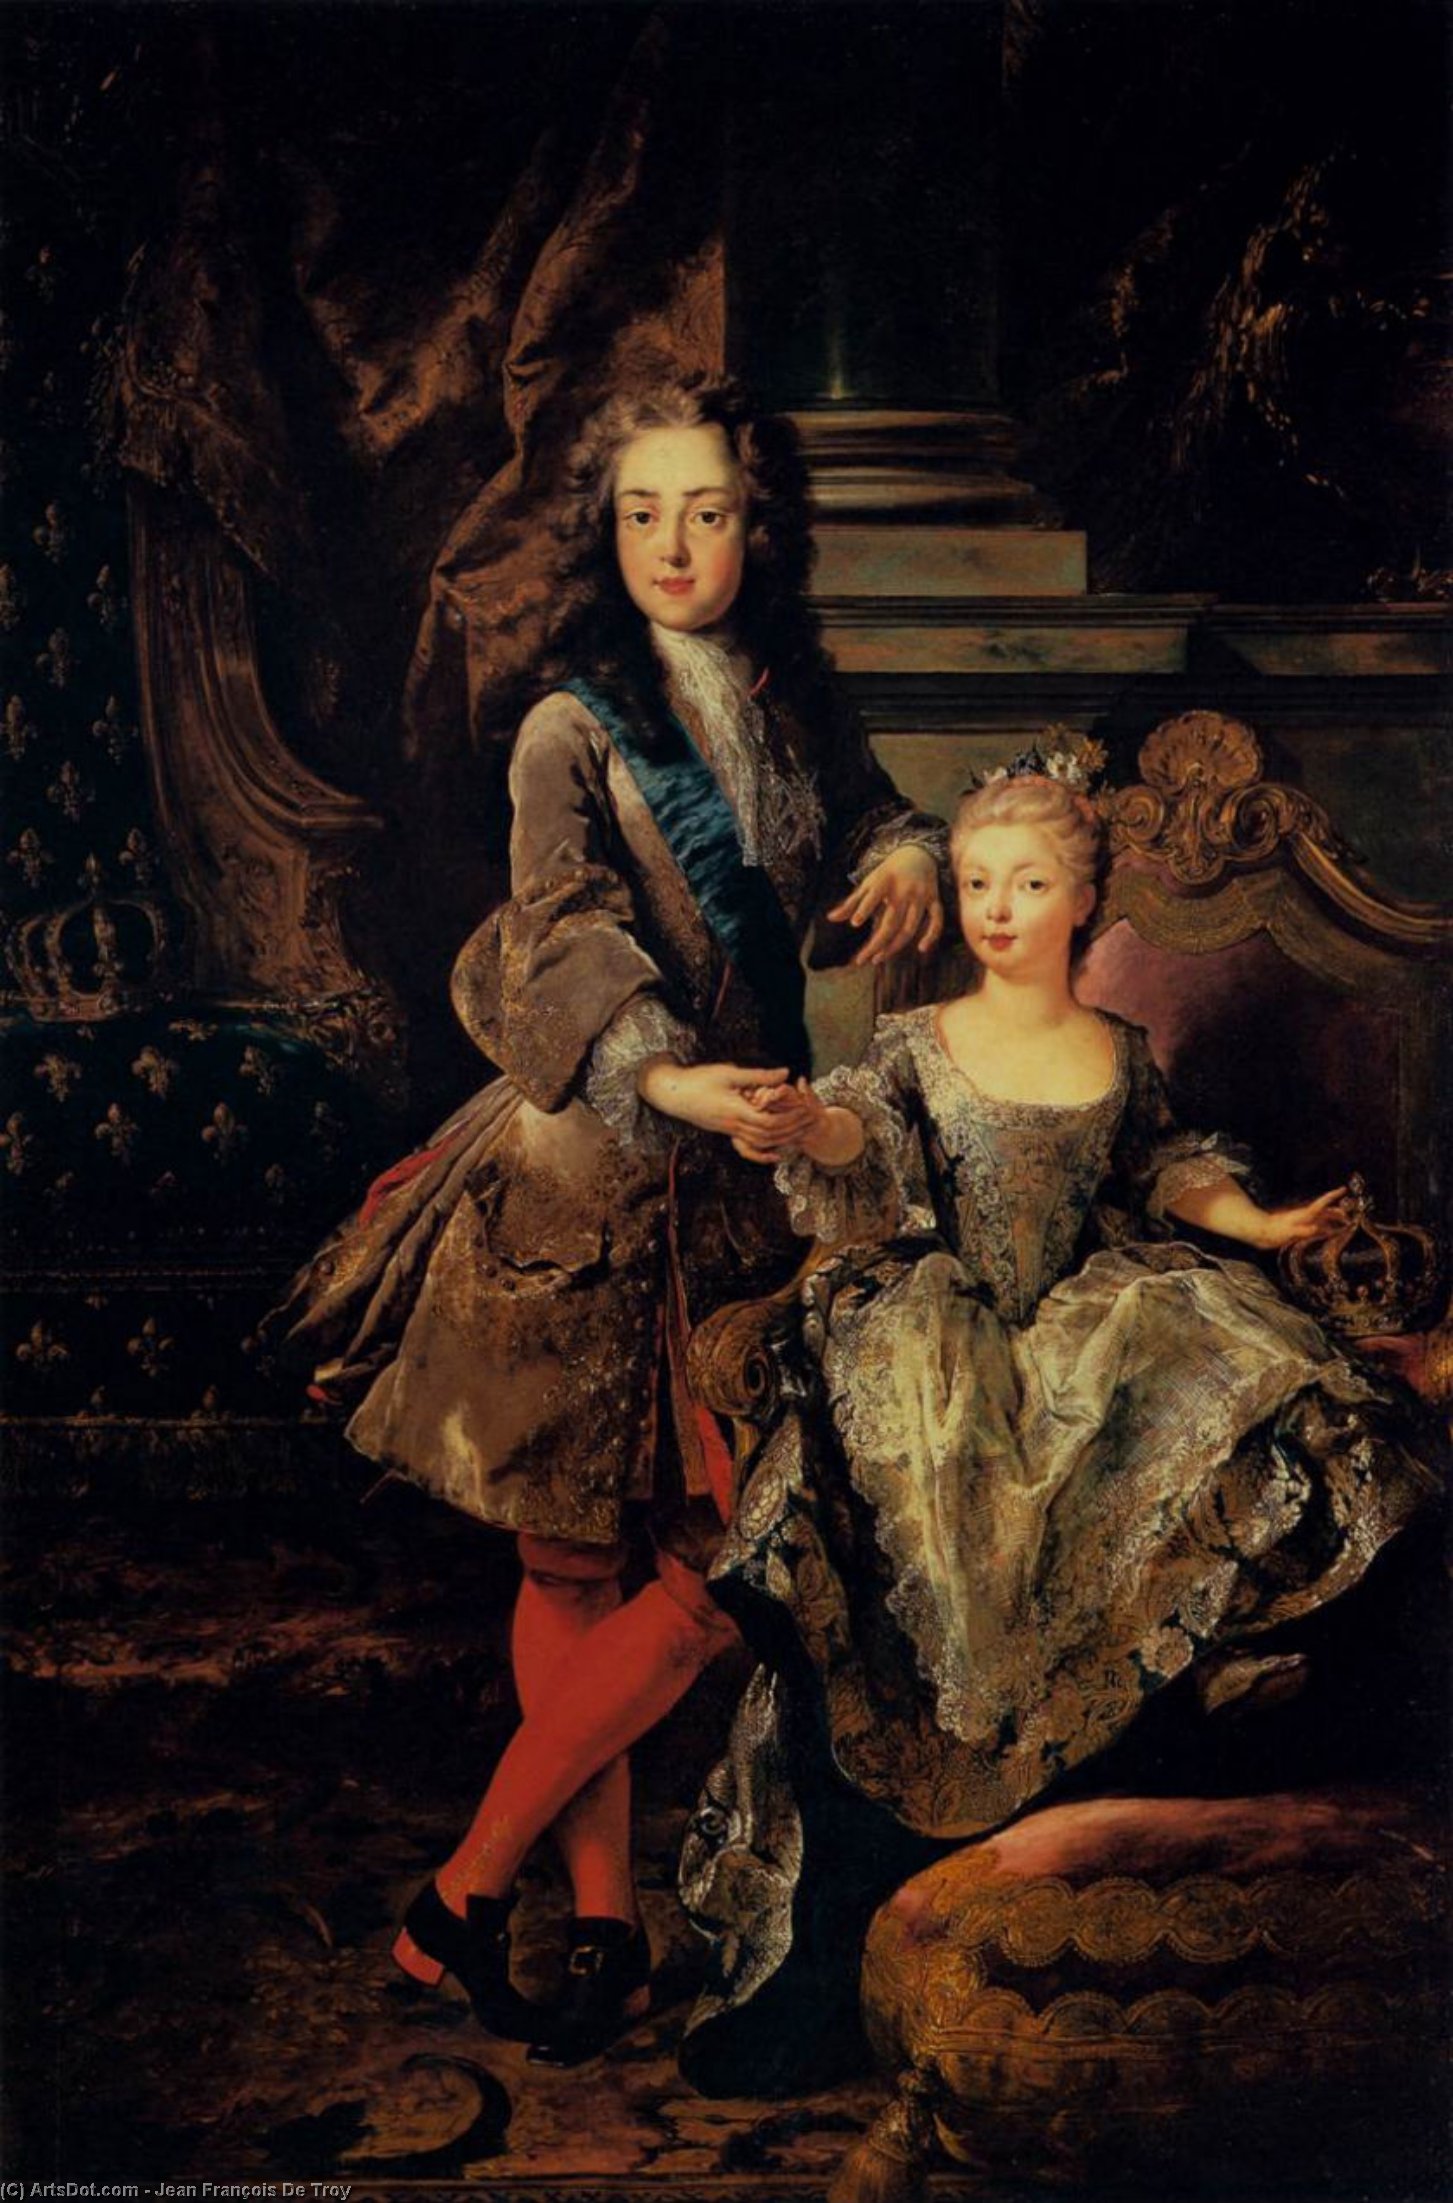 WikiOO.org - 백과 사전 - 회화, 삽화 Jean François De Troy - Portrait of Louis XV of France and Maria Anna Victoria of Spain